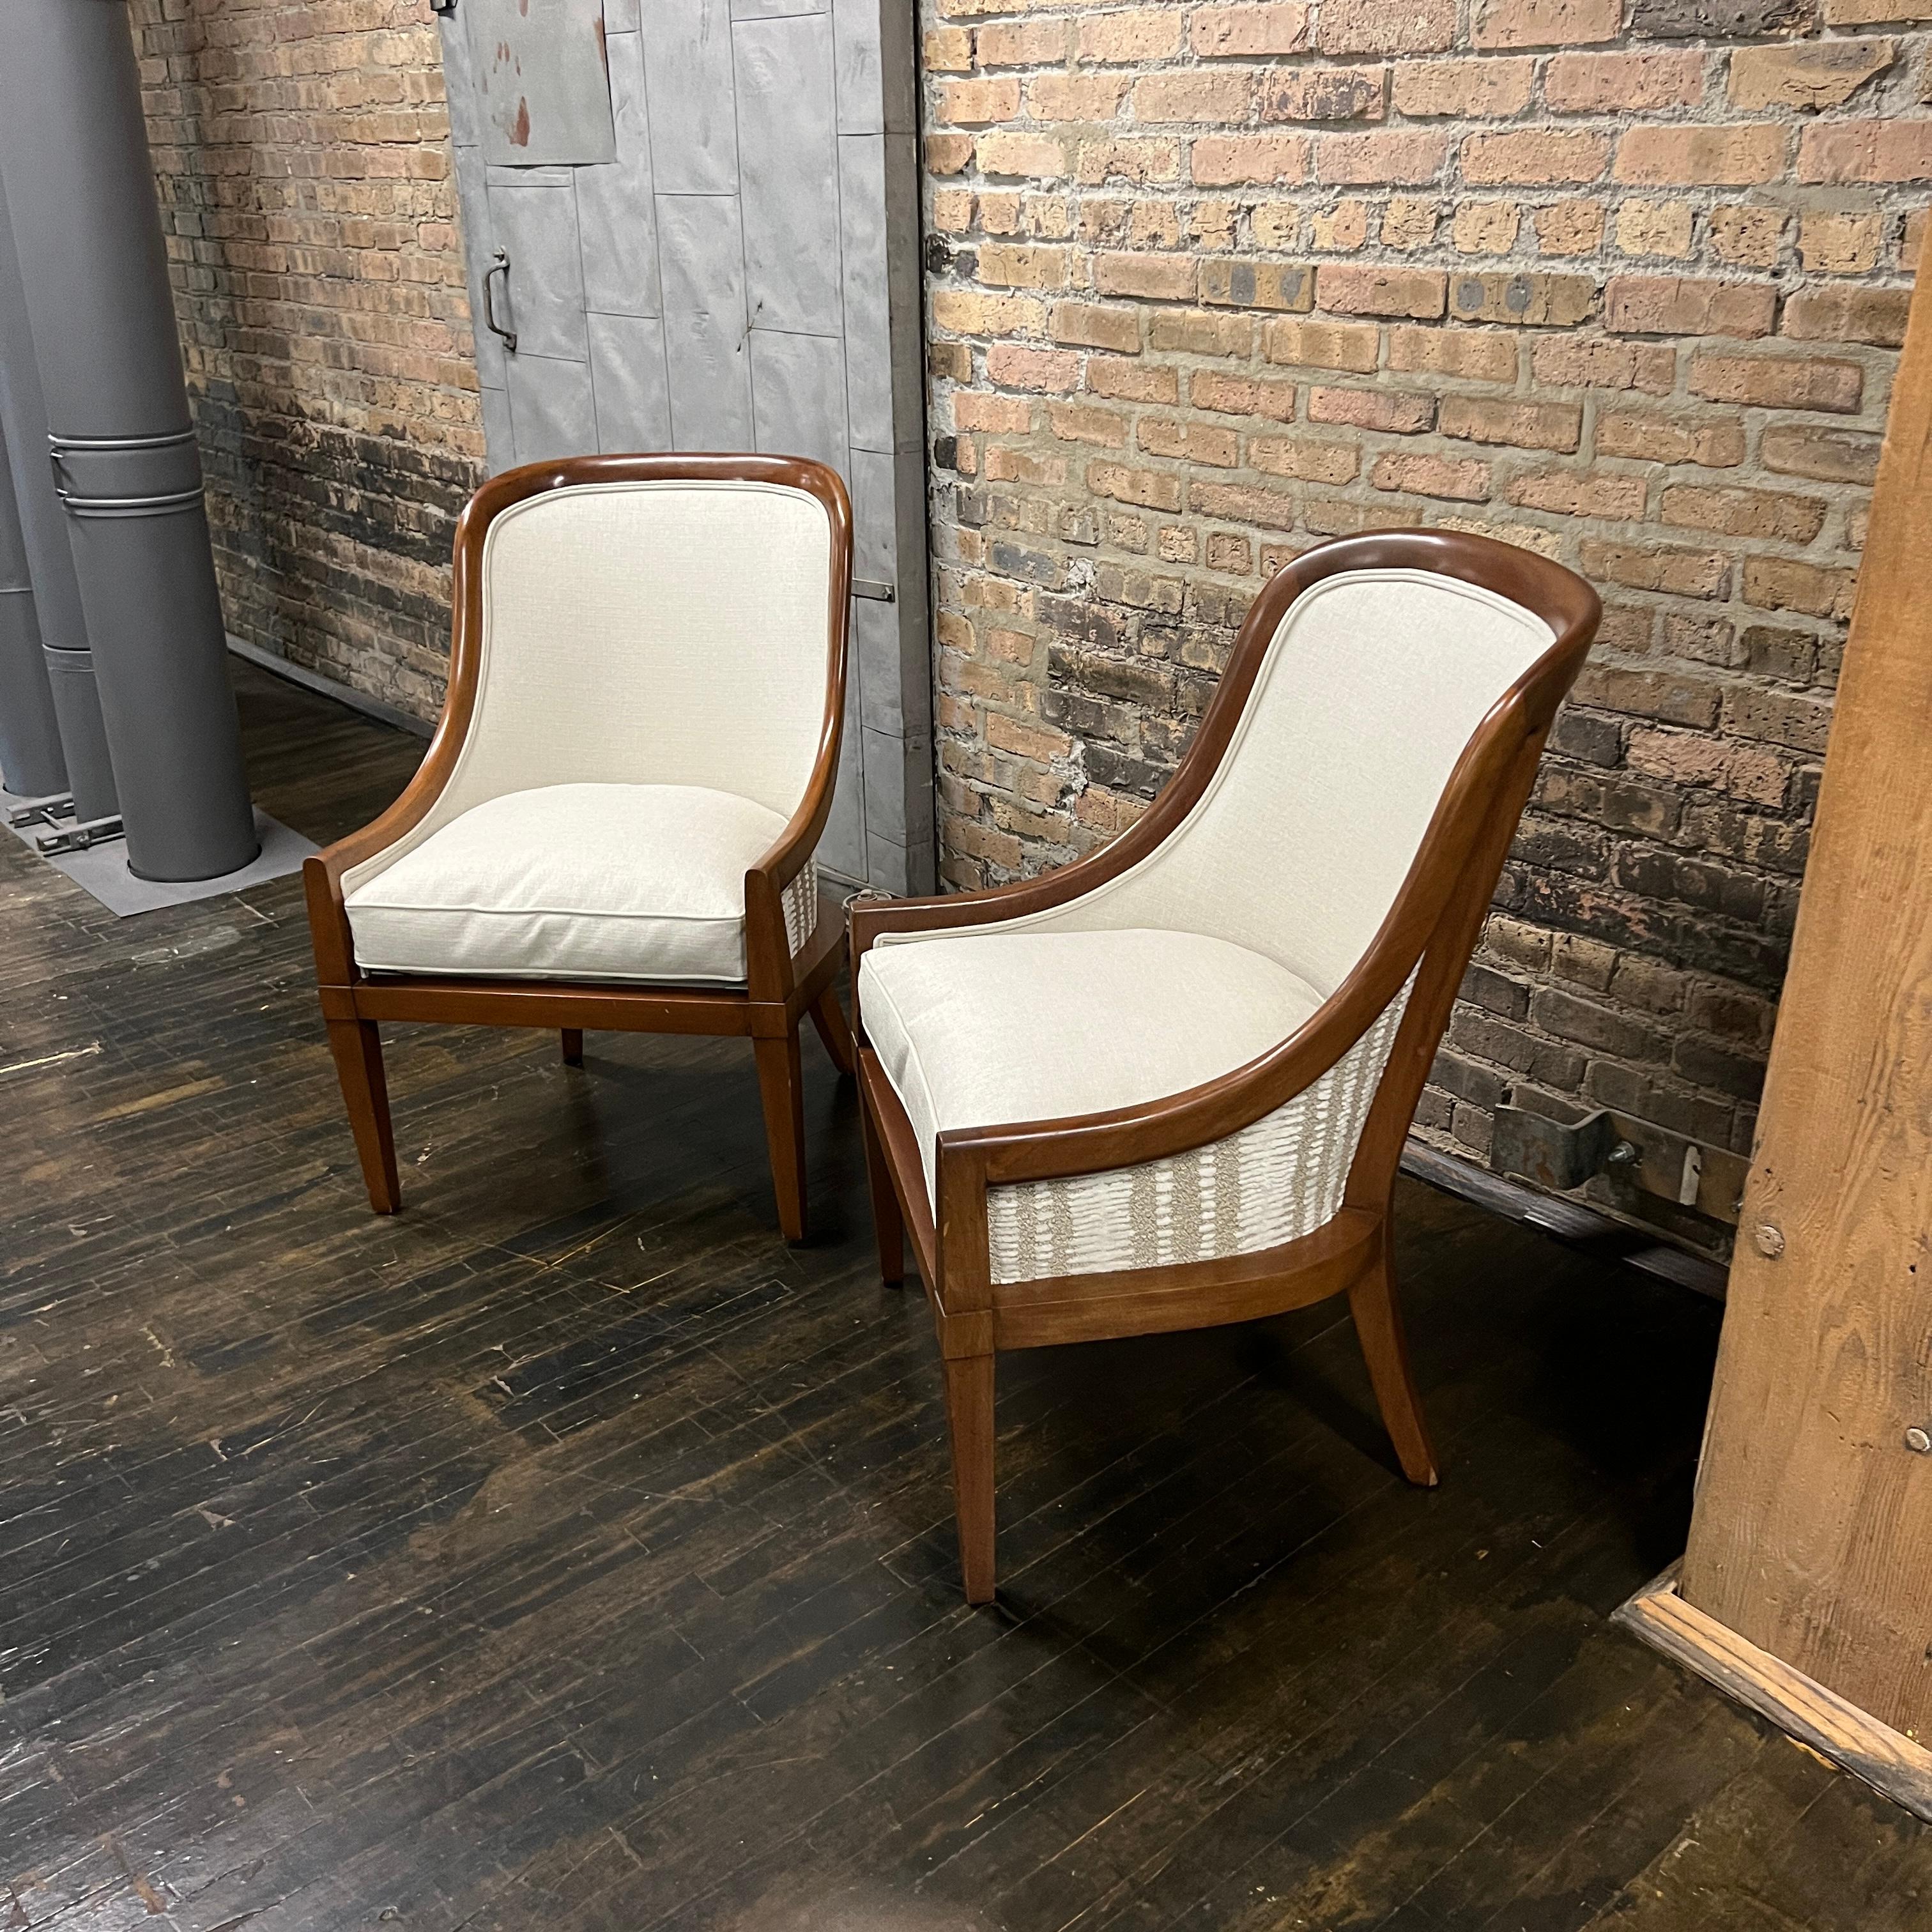 Regency Pair of 1940's Spoon Back Lounge Chairs with Walnut Frames For Sale